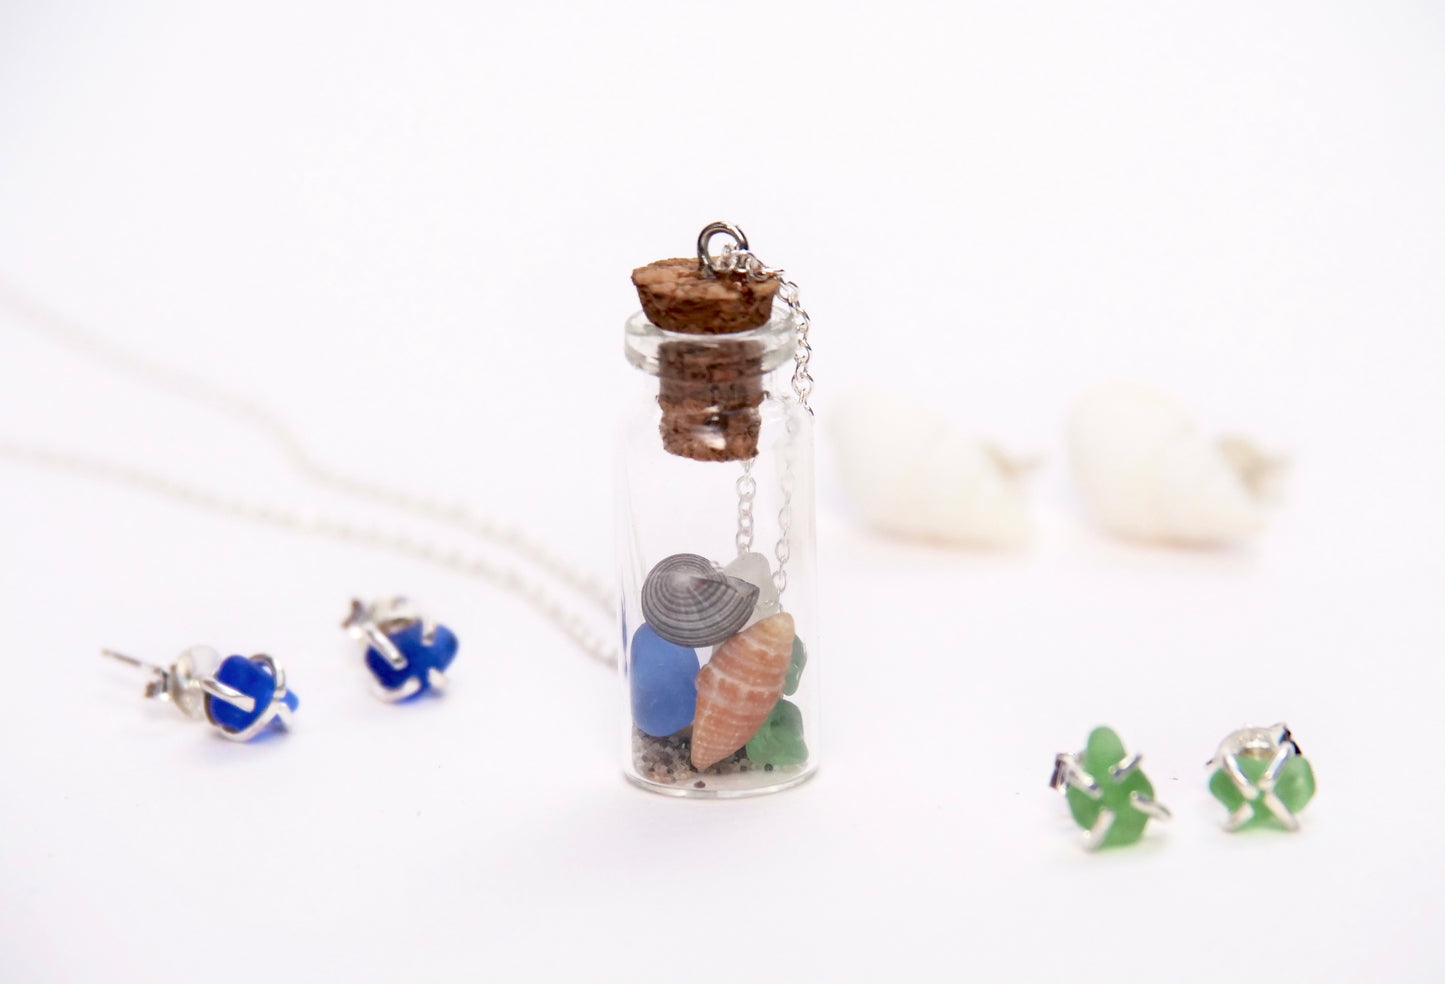 Glass bottle pendant necklace filled with colourful sea shells and beach sand, with sea glass and silver stud earrings. Handmade in Canada by Bridget Turner.